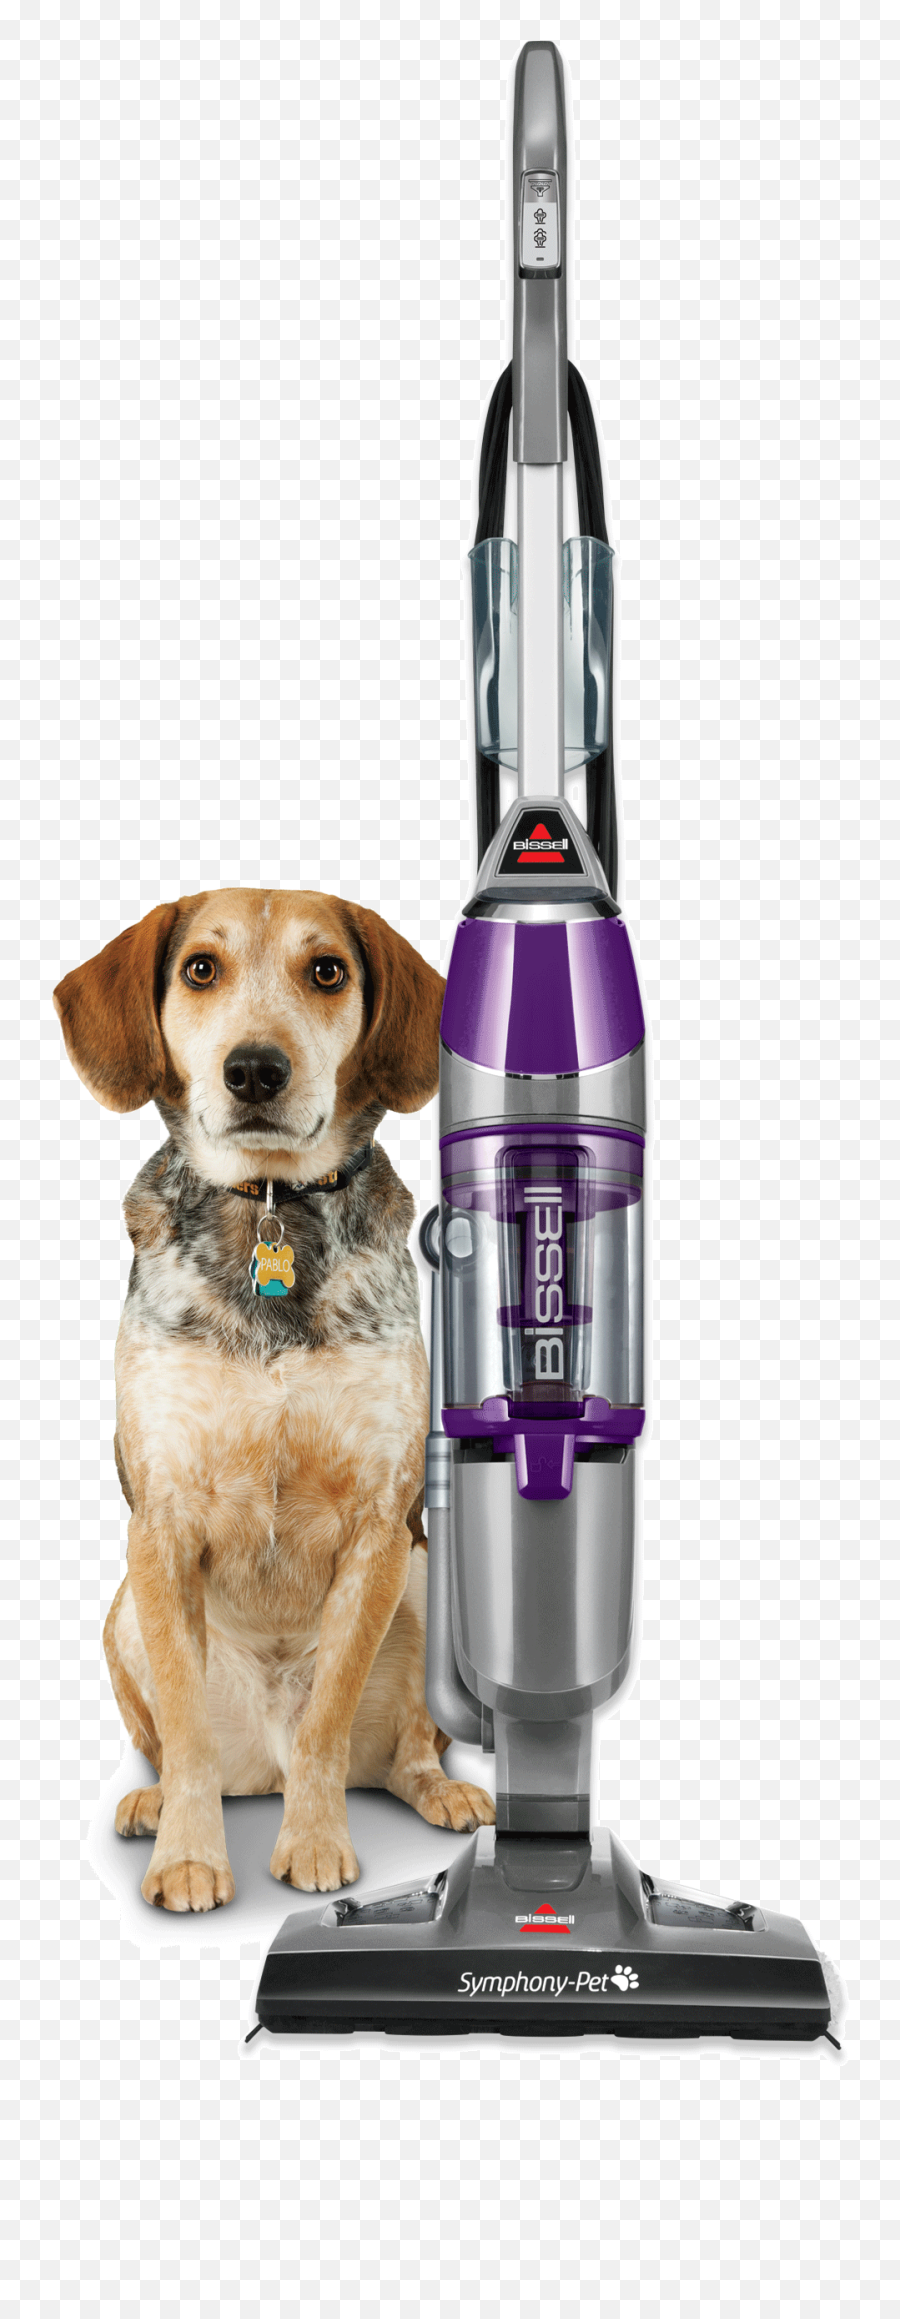 Symphony Pet Vacuum And Steam Mop 1543 Bissell - Bissell Symphony Pet Png,Bissell Gray Icon Pet Bagless Stick Vacuum With Swivel Head